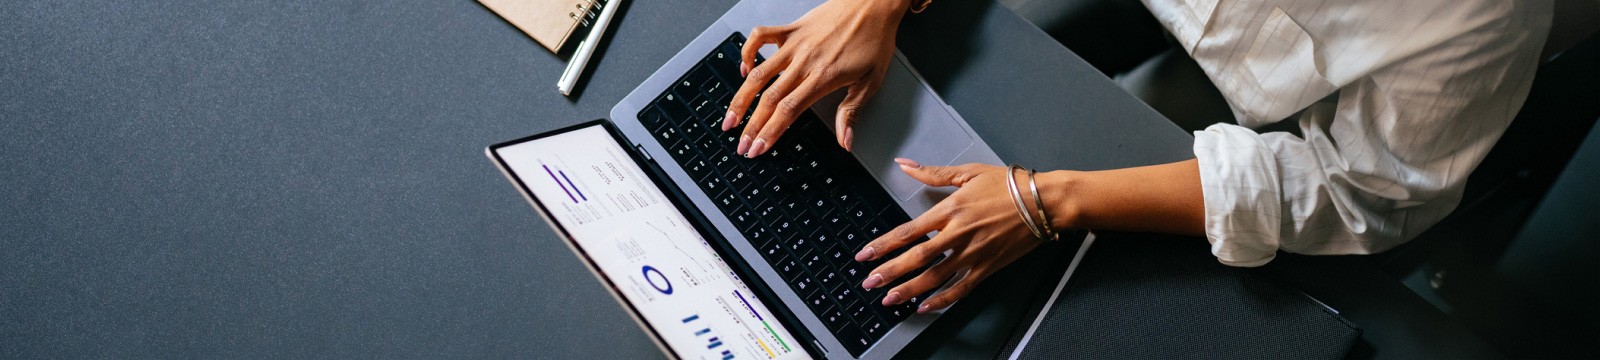 Laptop open on desk with a woman's hands visible typing.  